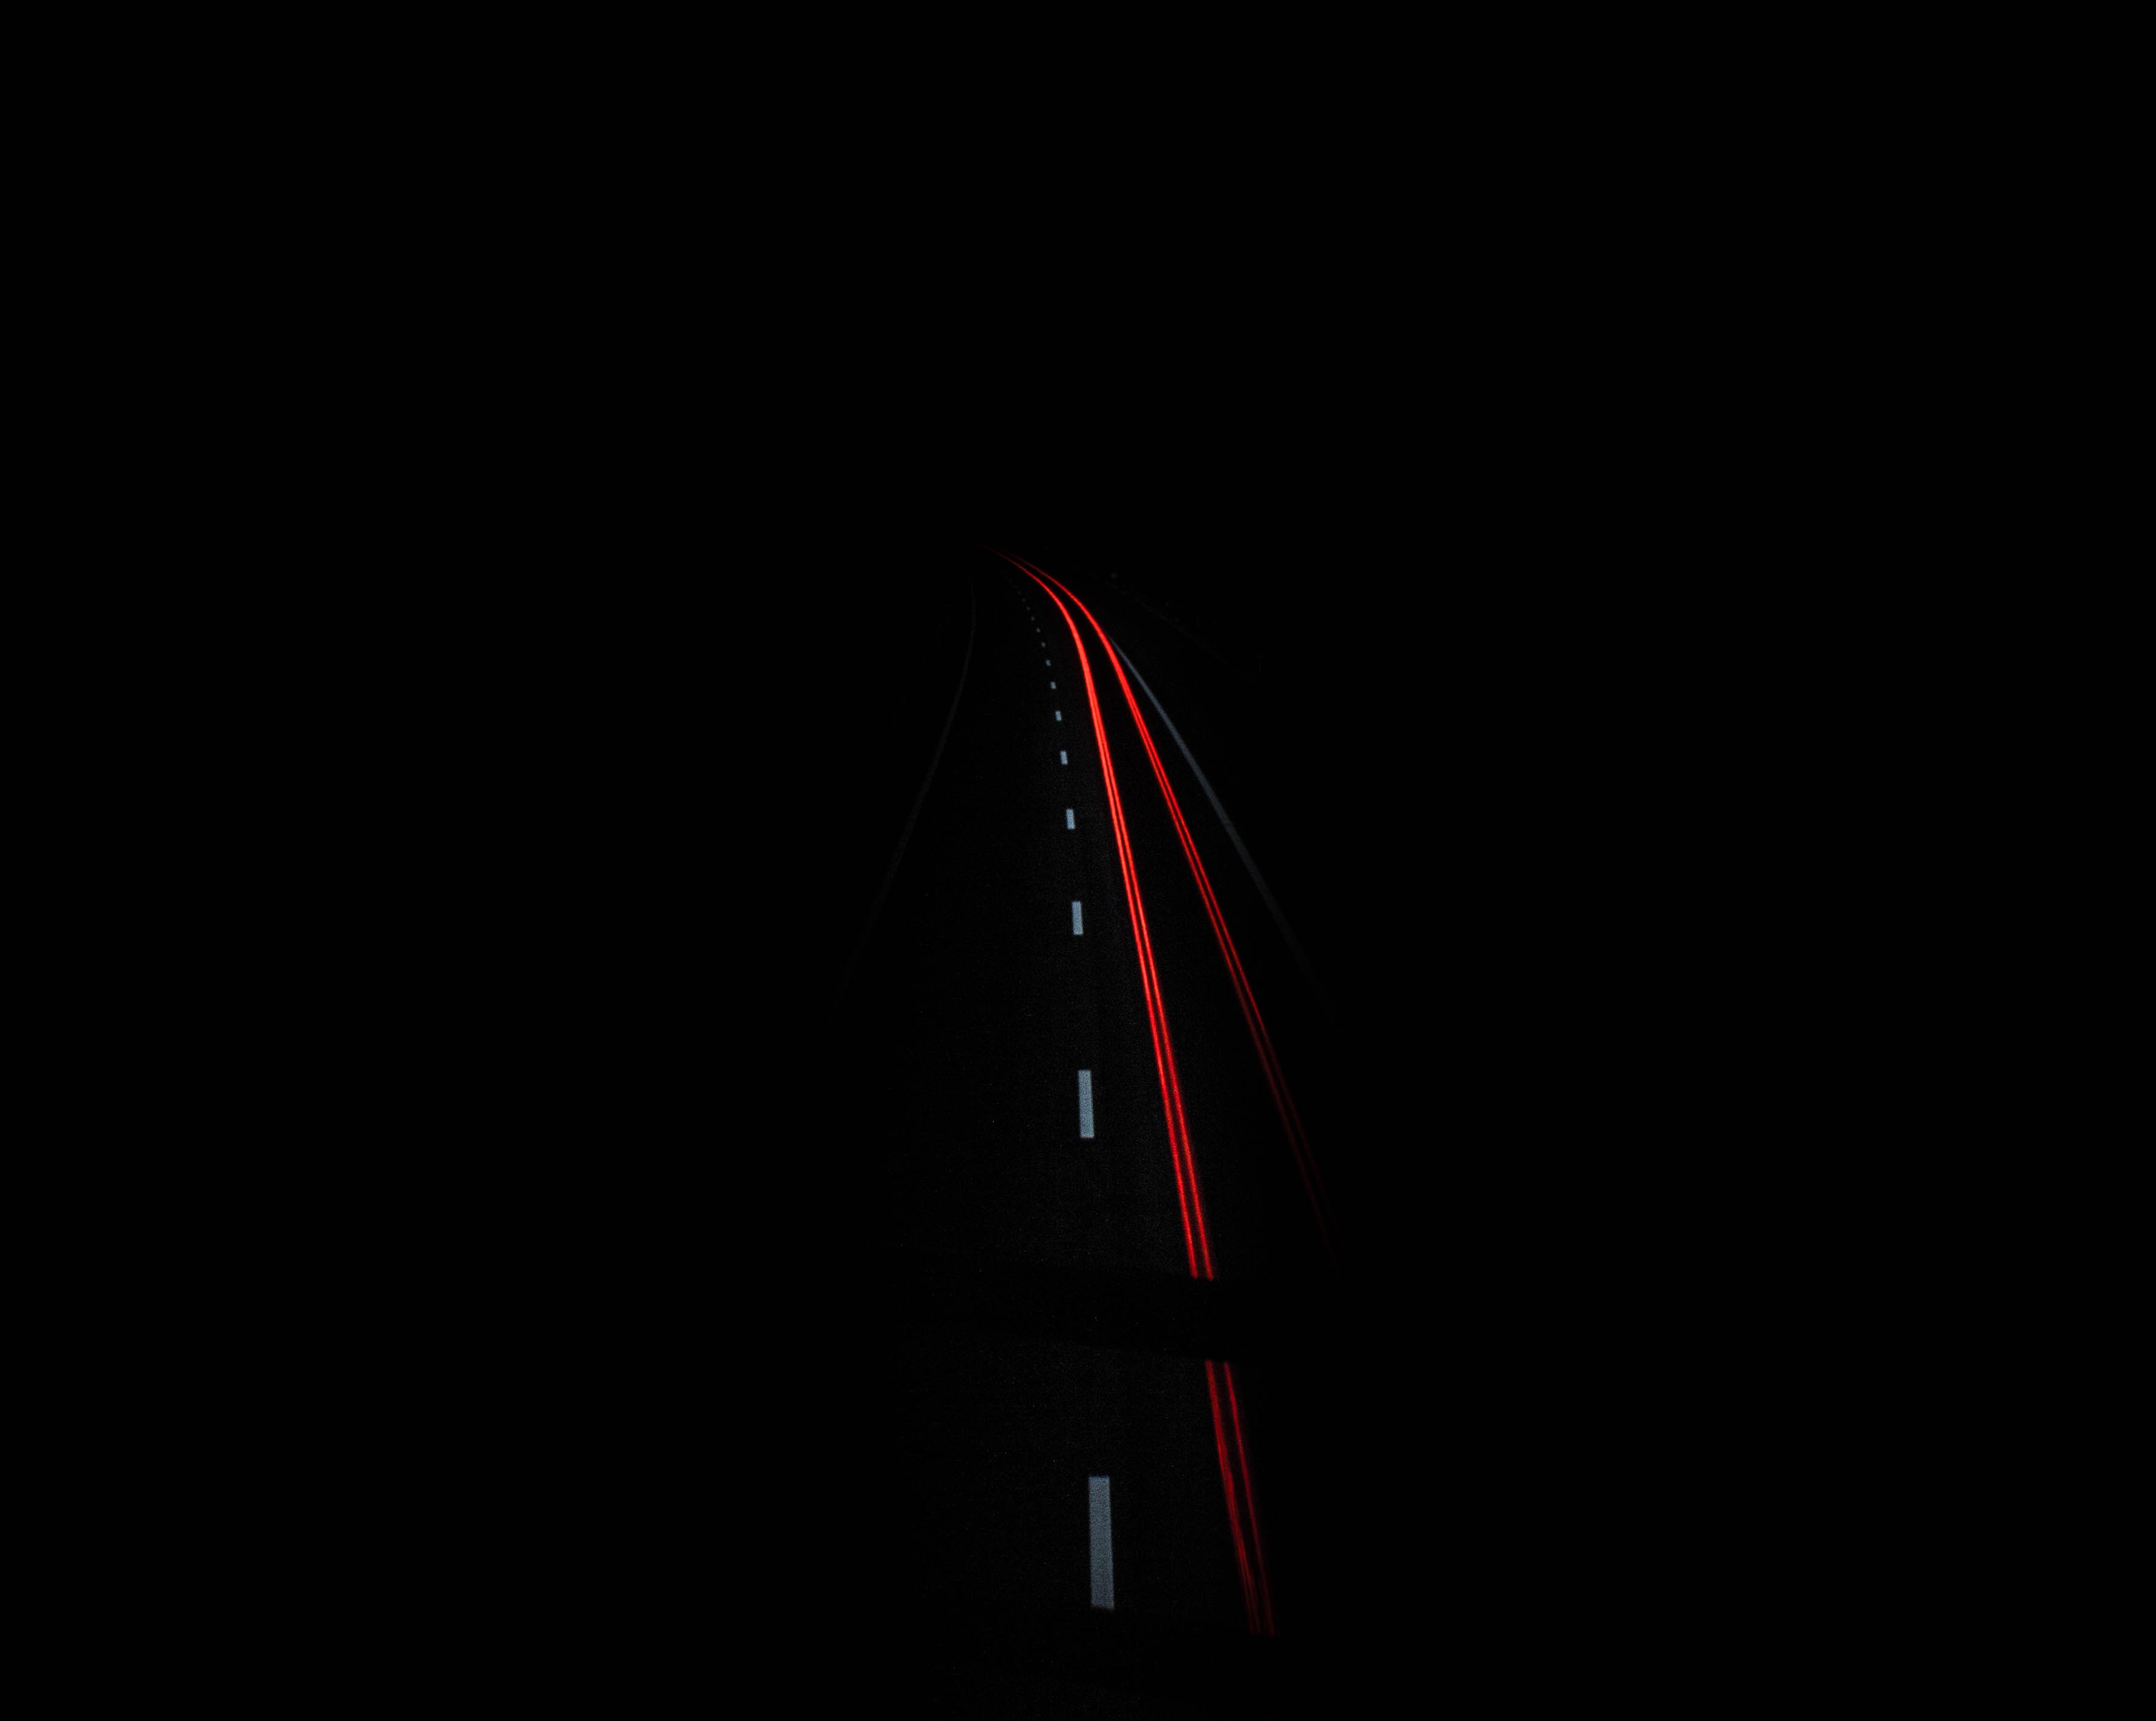 52312 download wallpaper light, dark, shine, road, markup, direction screensavers and pictures for free